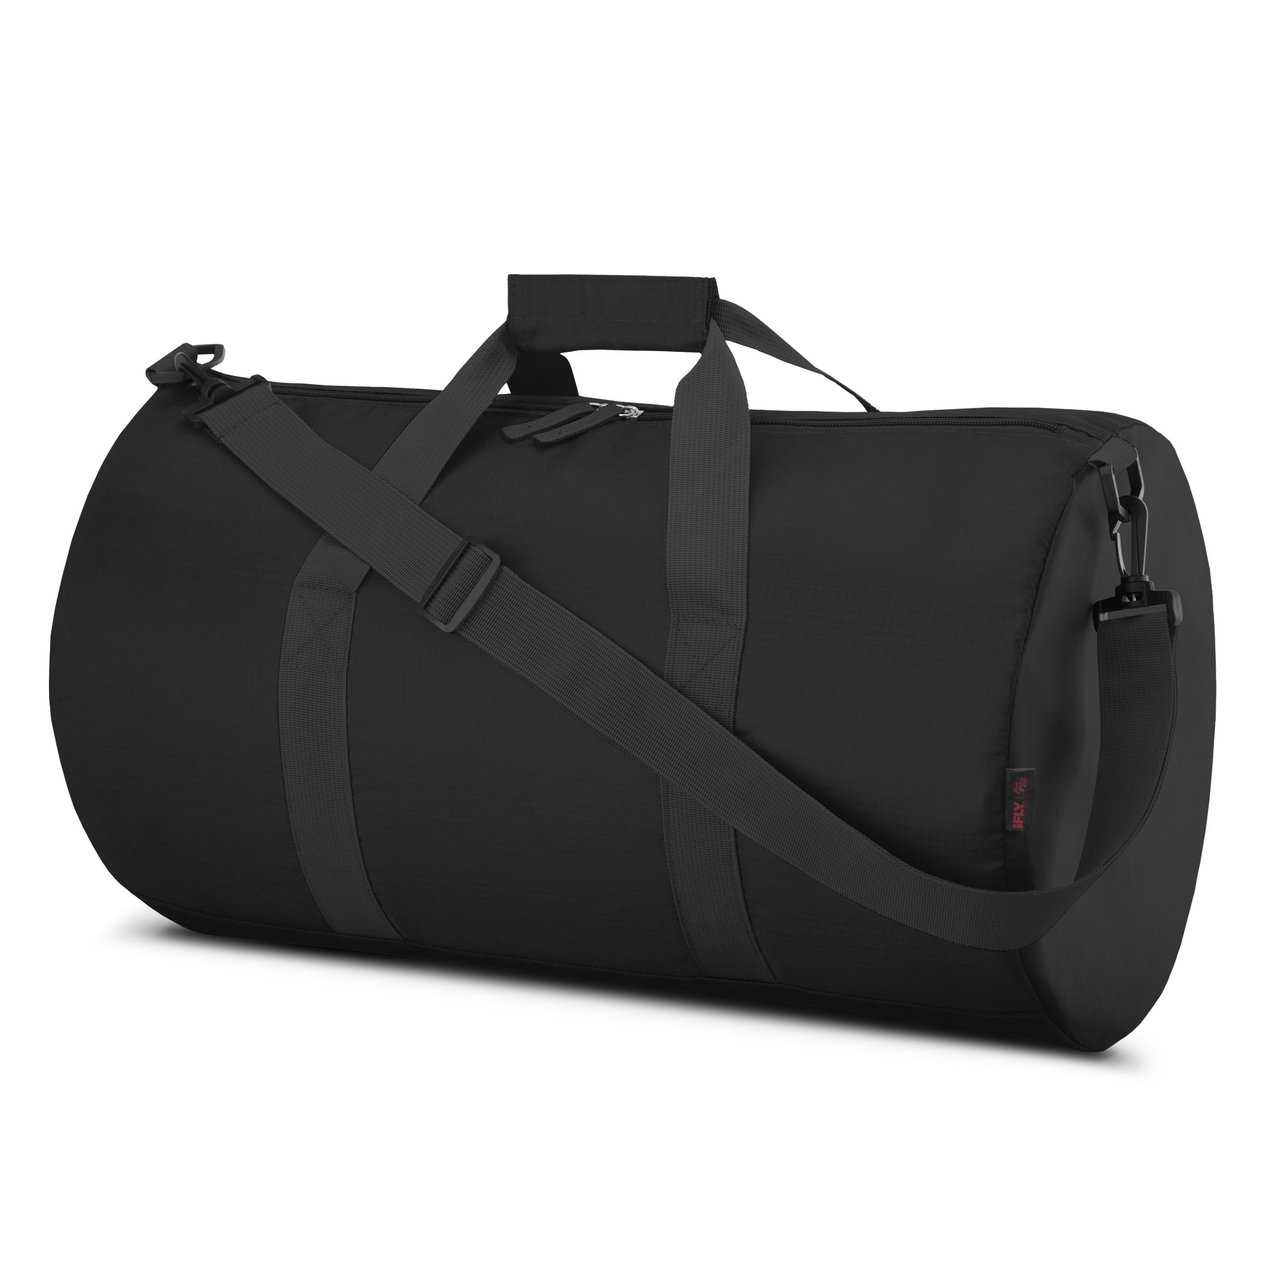 1 Packable Duffle with Adjustable Shoulder Strap and Luggage Trolley Sleeve